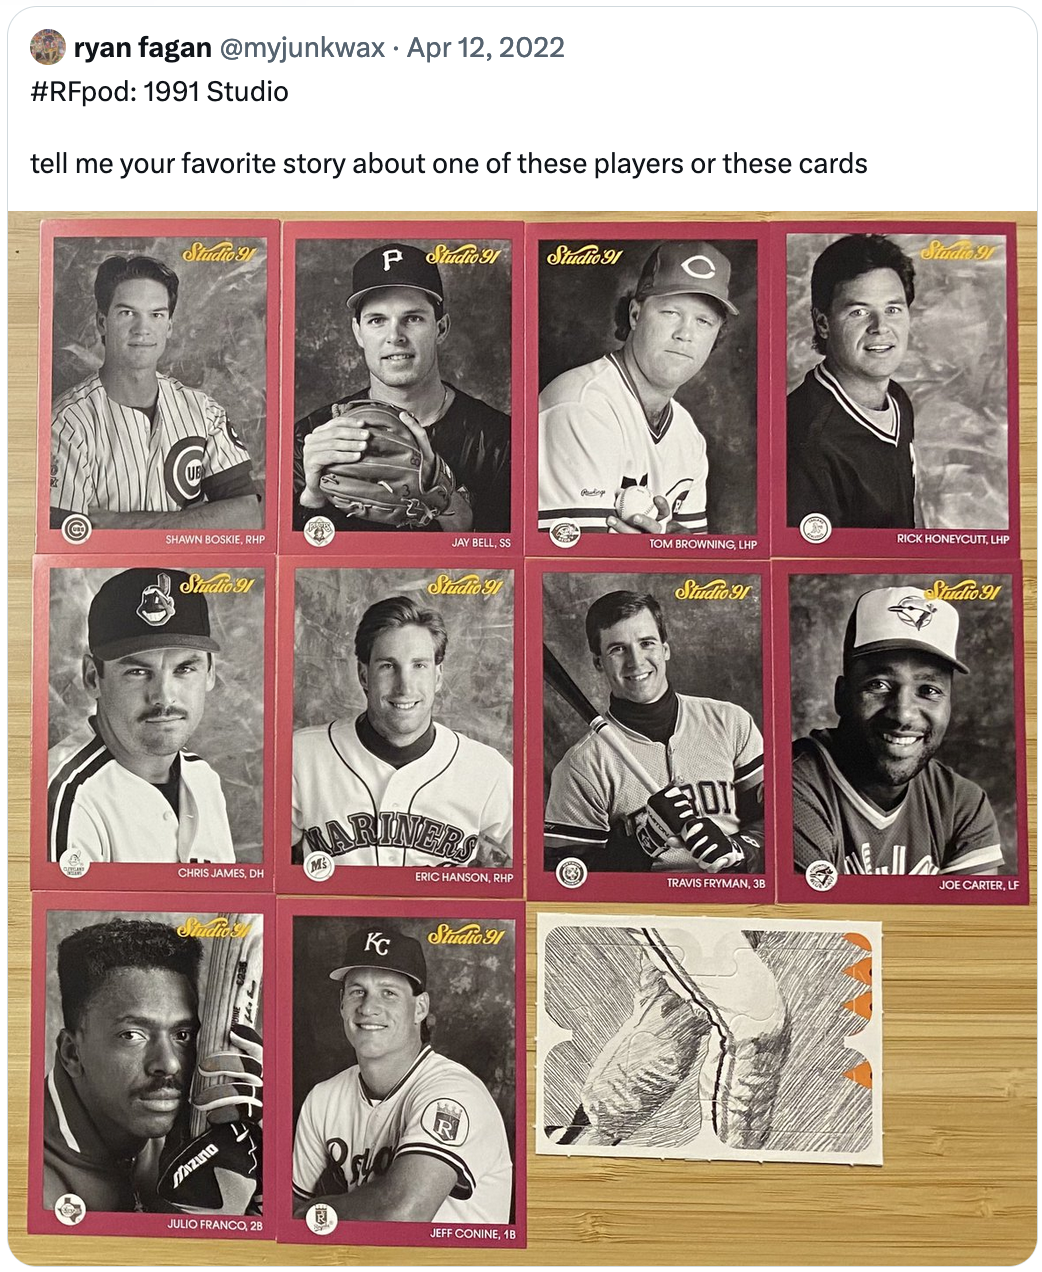 1991 Studio. Tell me your favorite story about one of these players or these cards